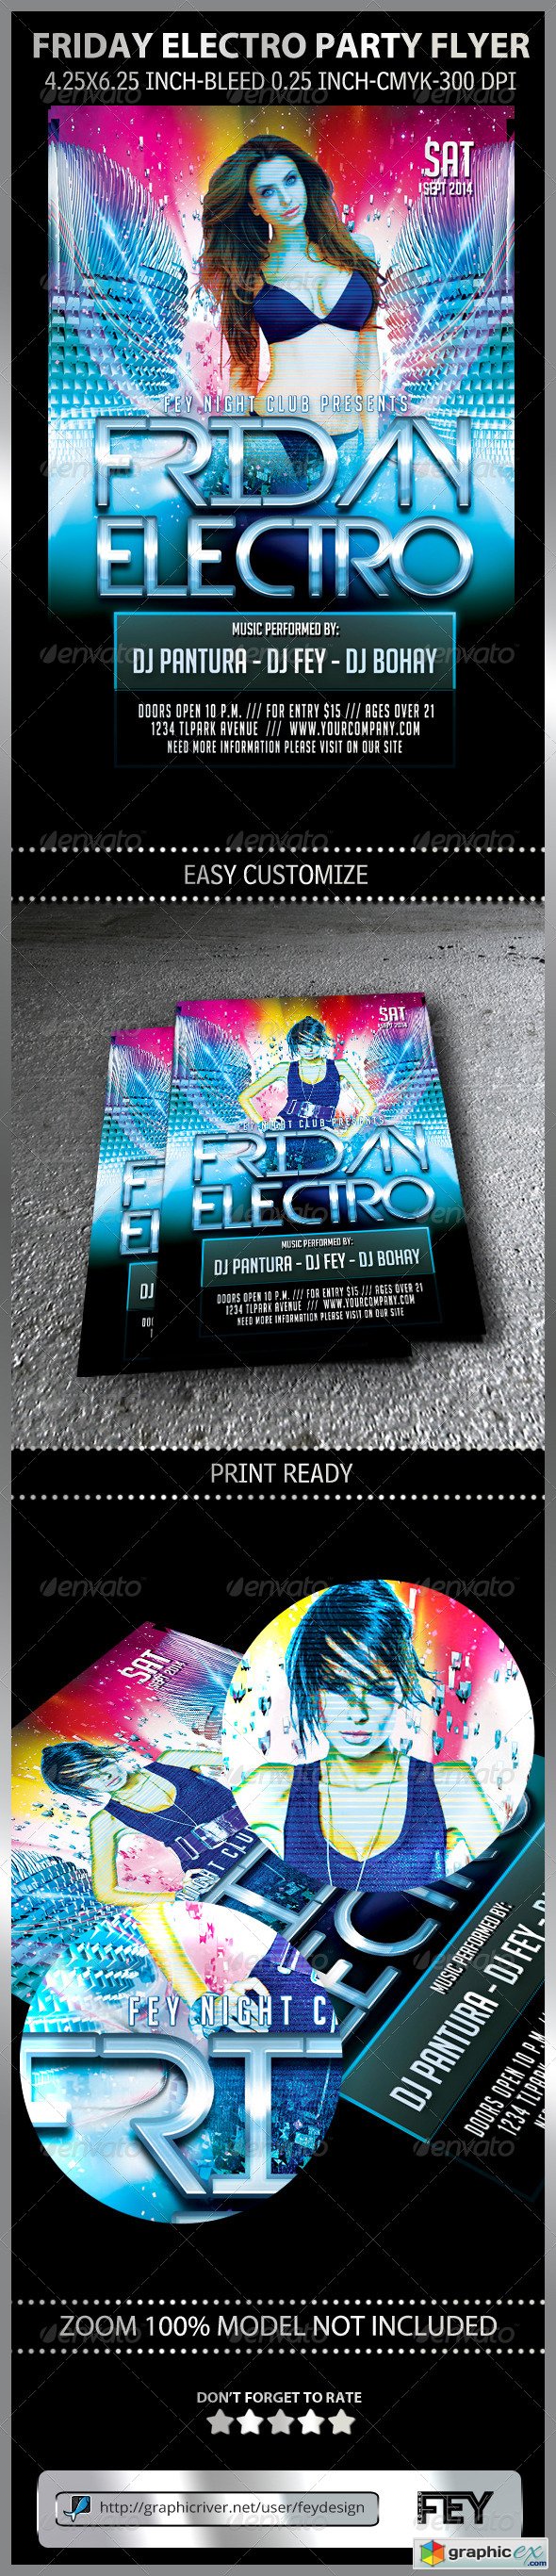 Friday Electro Party Flyer